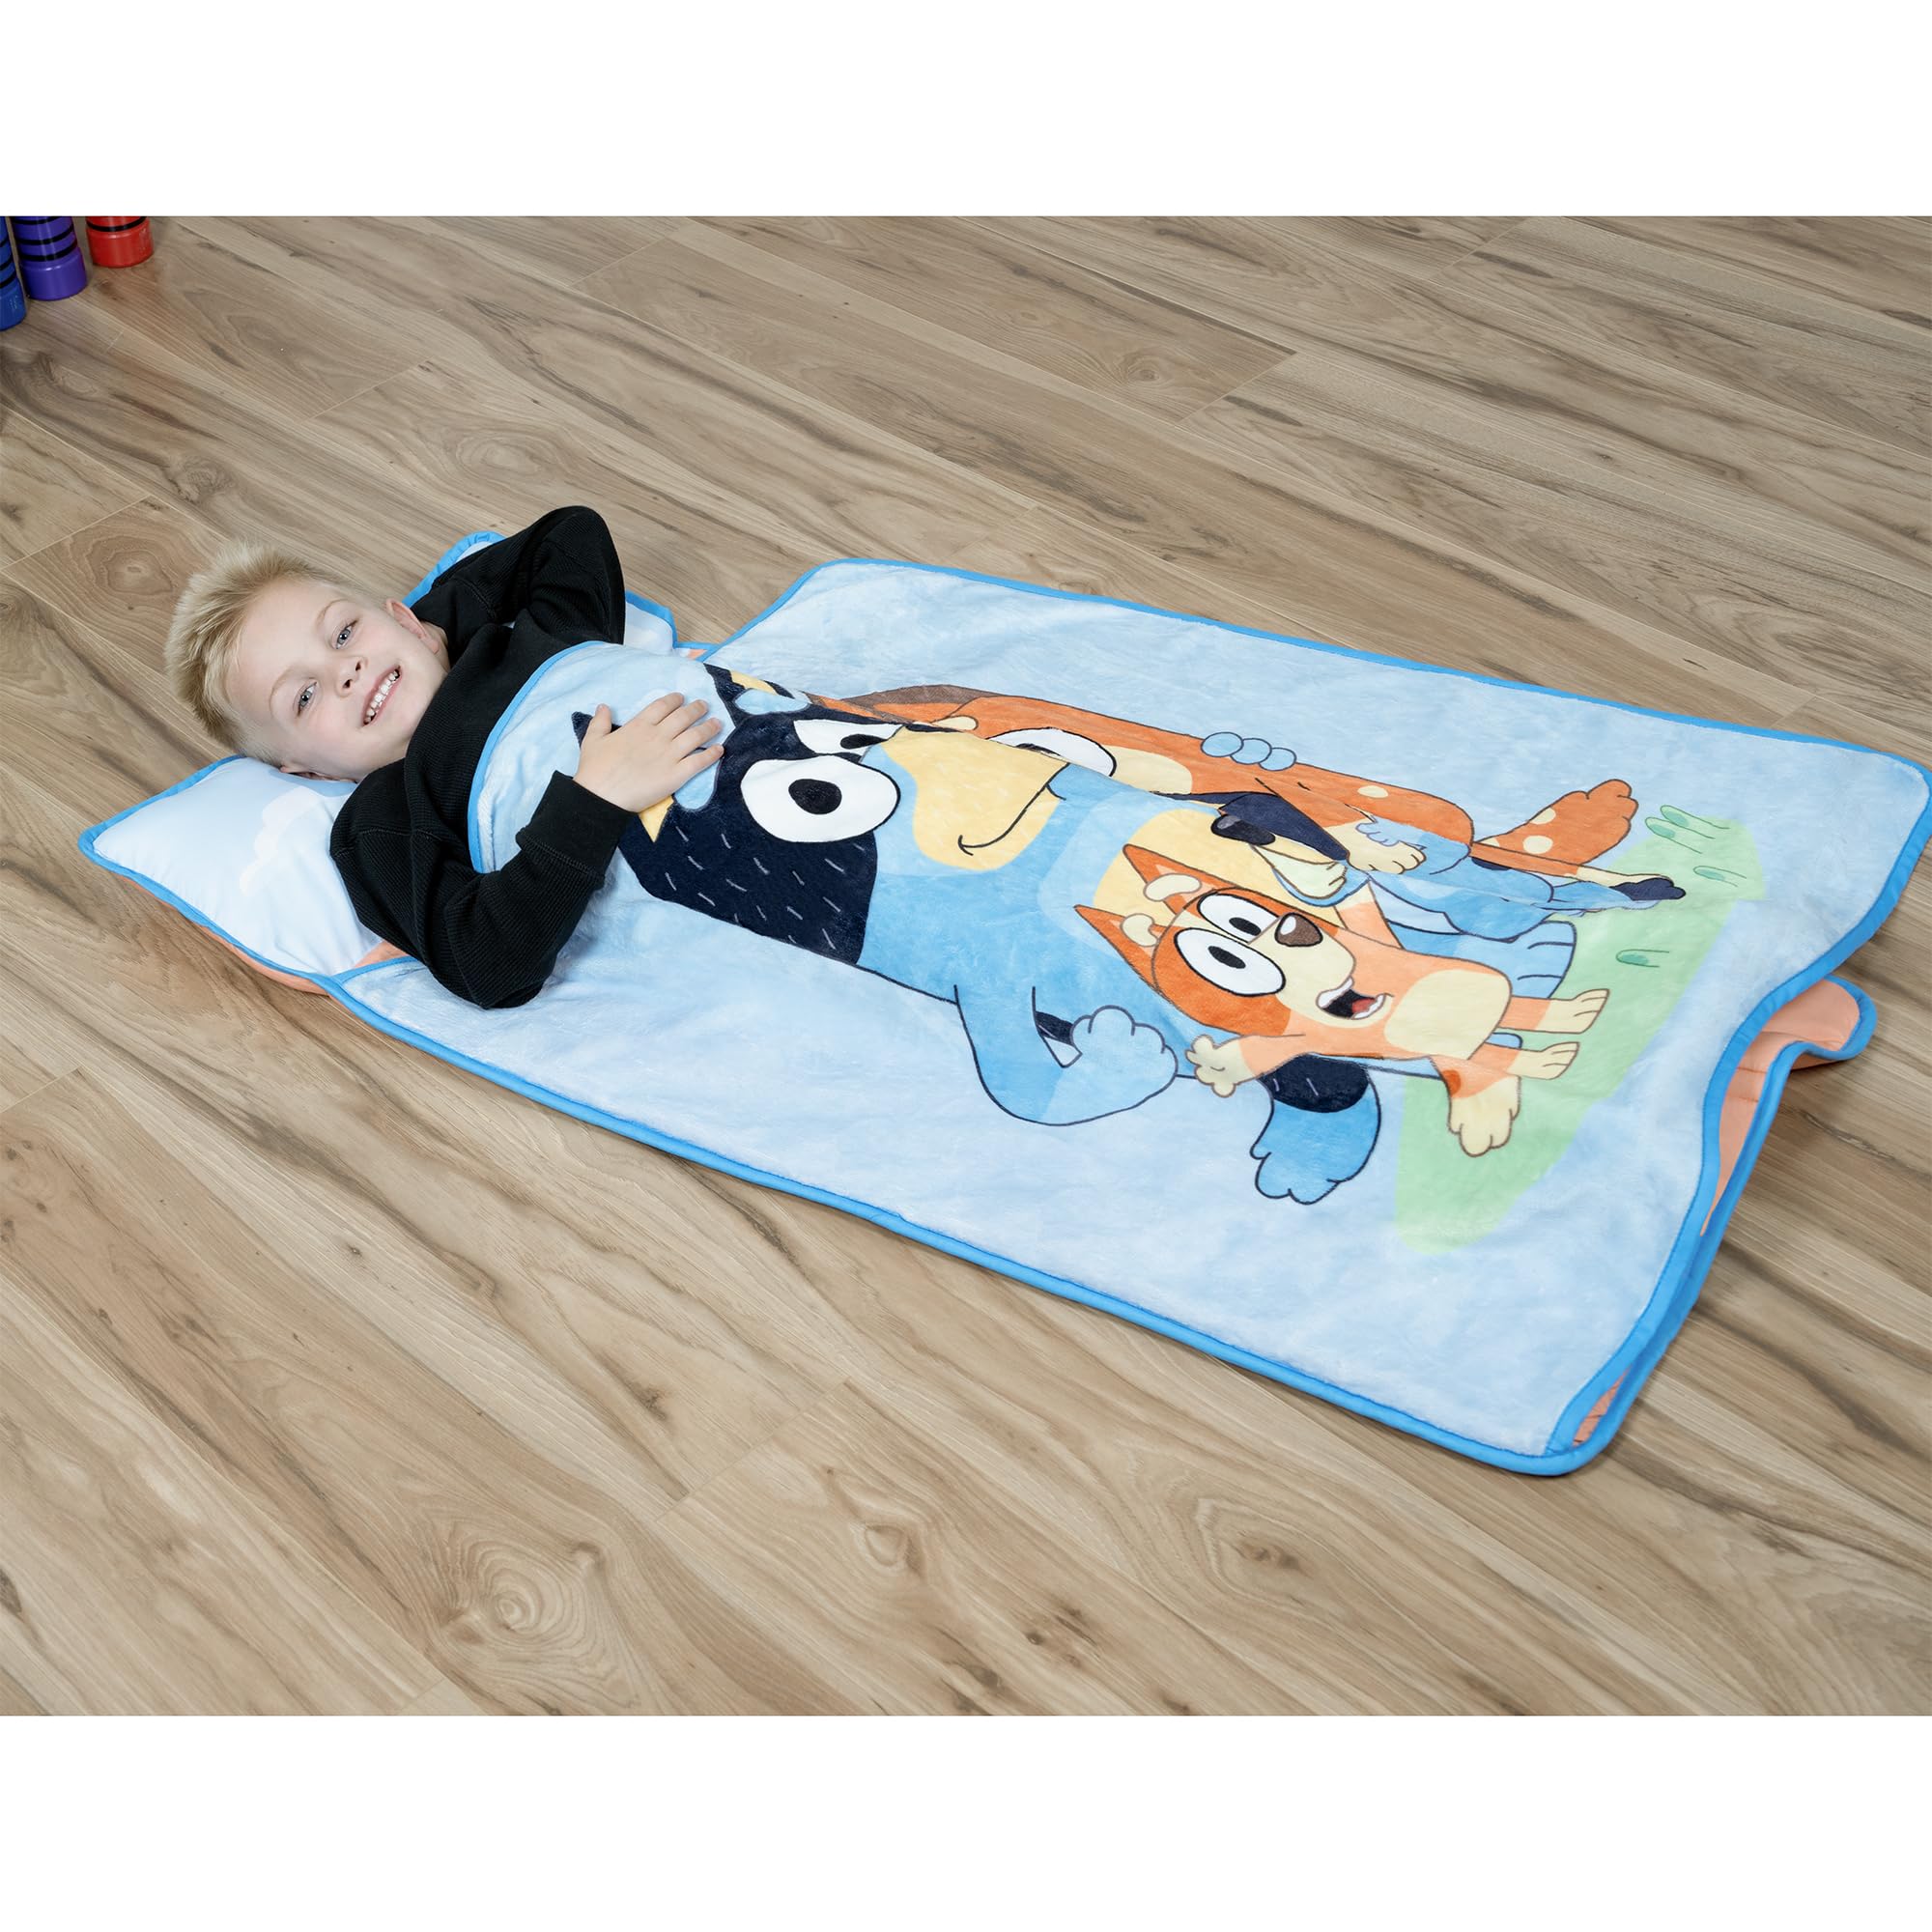 Bluey Kids Nap-Mat Set – Includes Pillow and Fleece Blanket – Great for Boys or Girls Napping During Daycare or Preschool - Fits Toddlers and Young Children